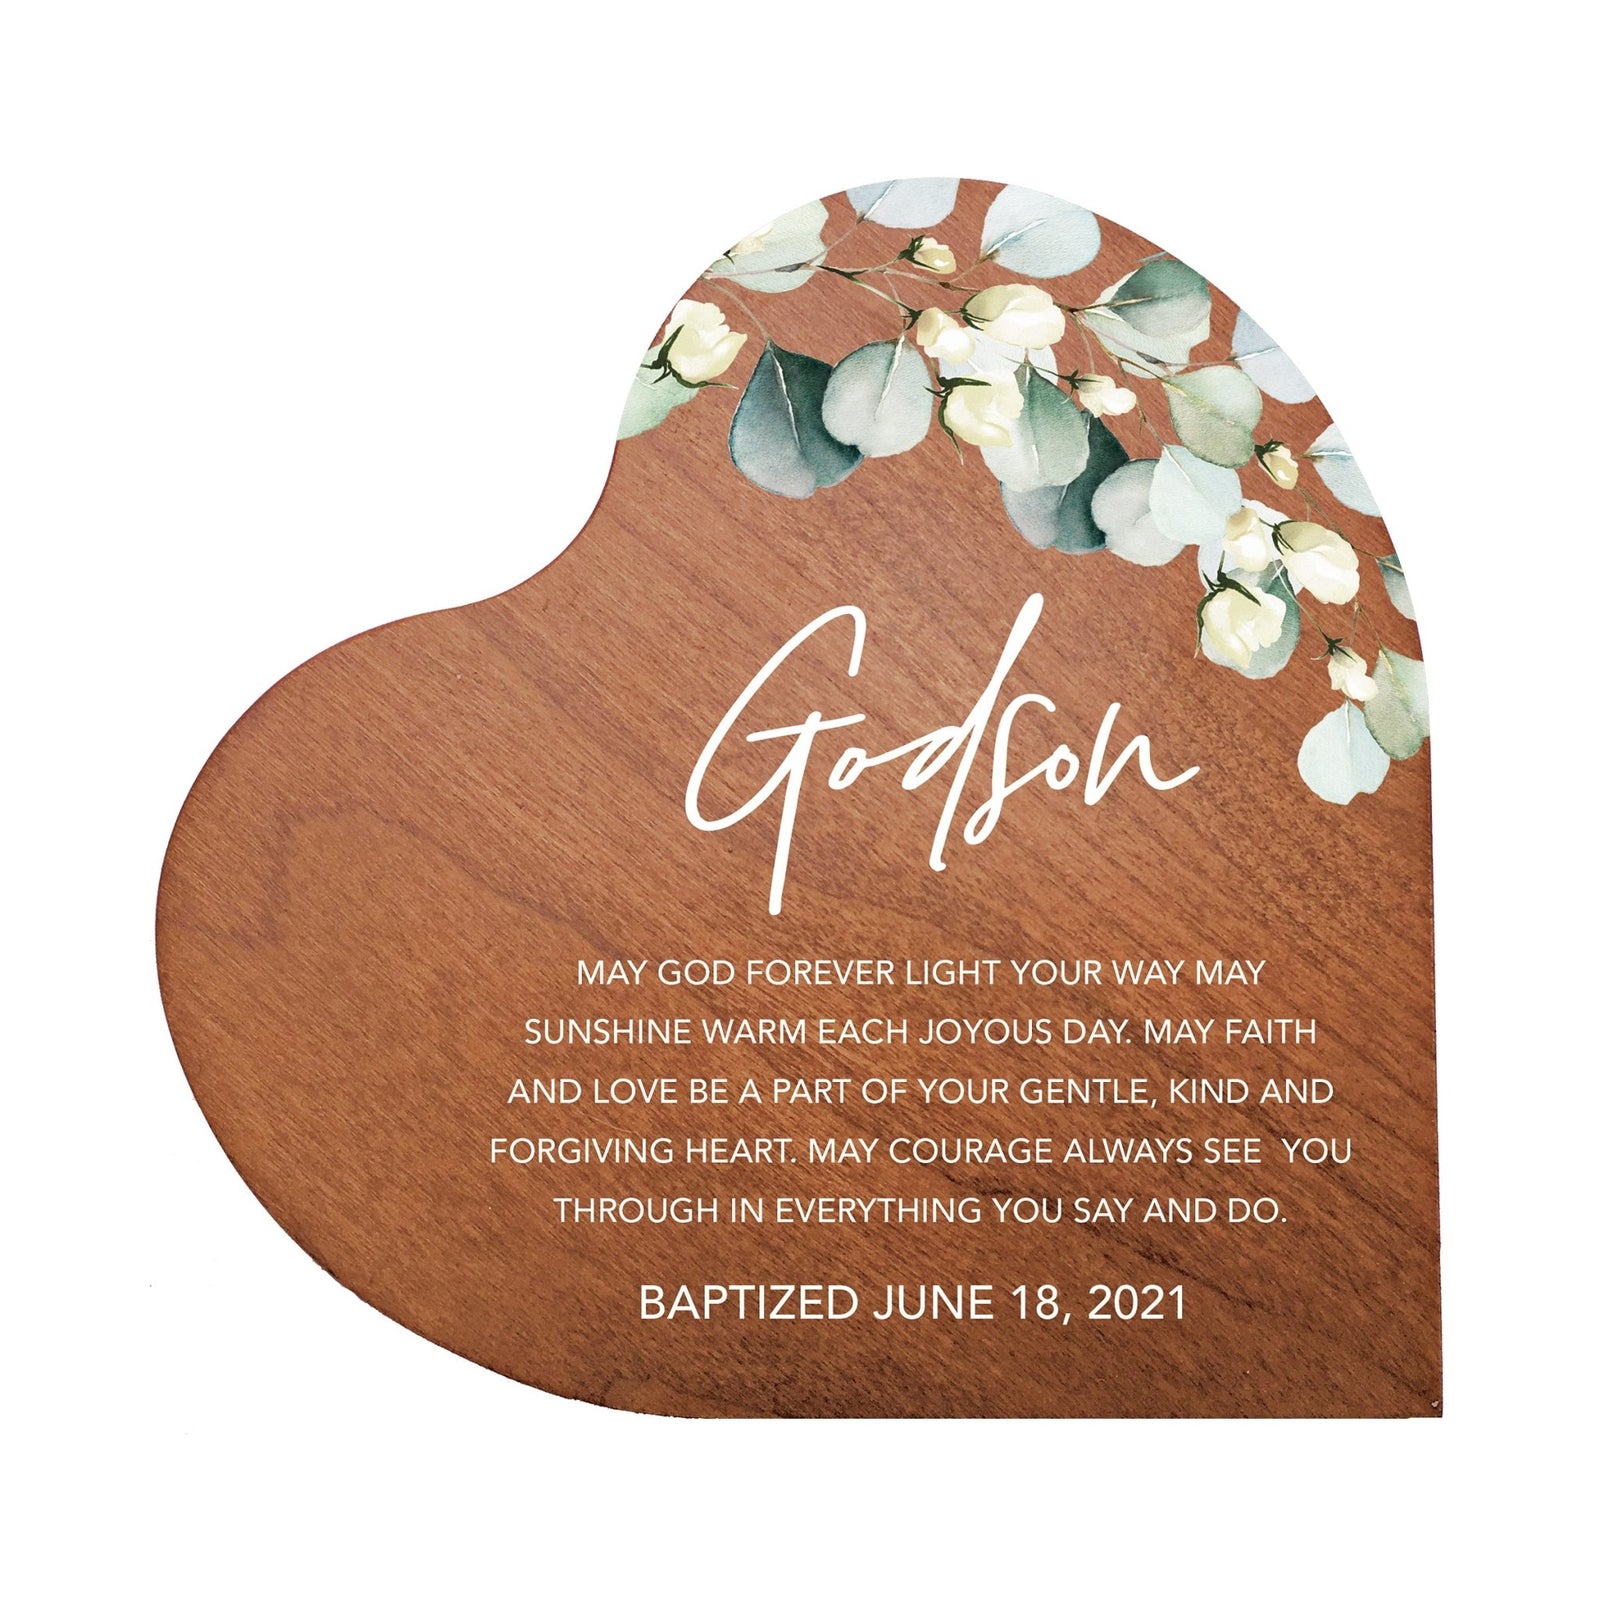 Personalized Baptism Heart Shaped Tabletop Signs Gift for Godson